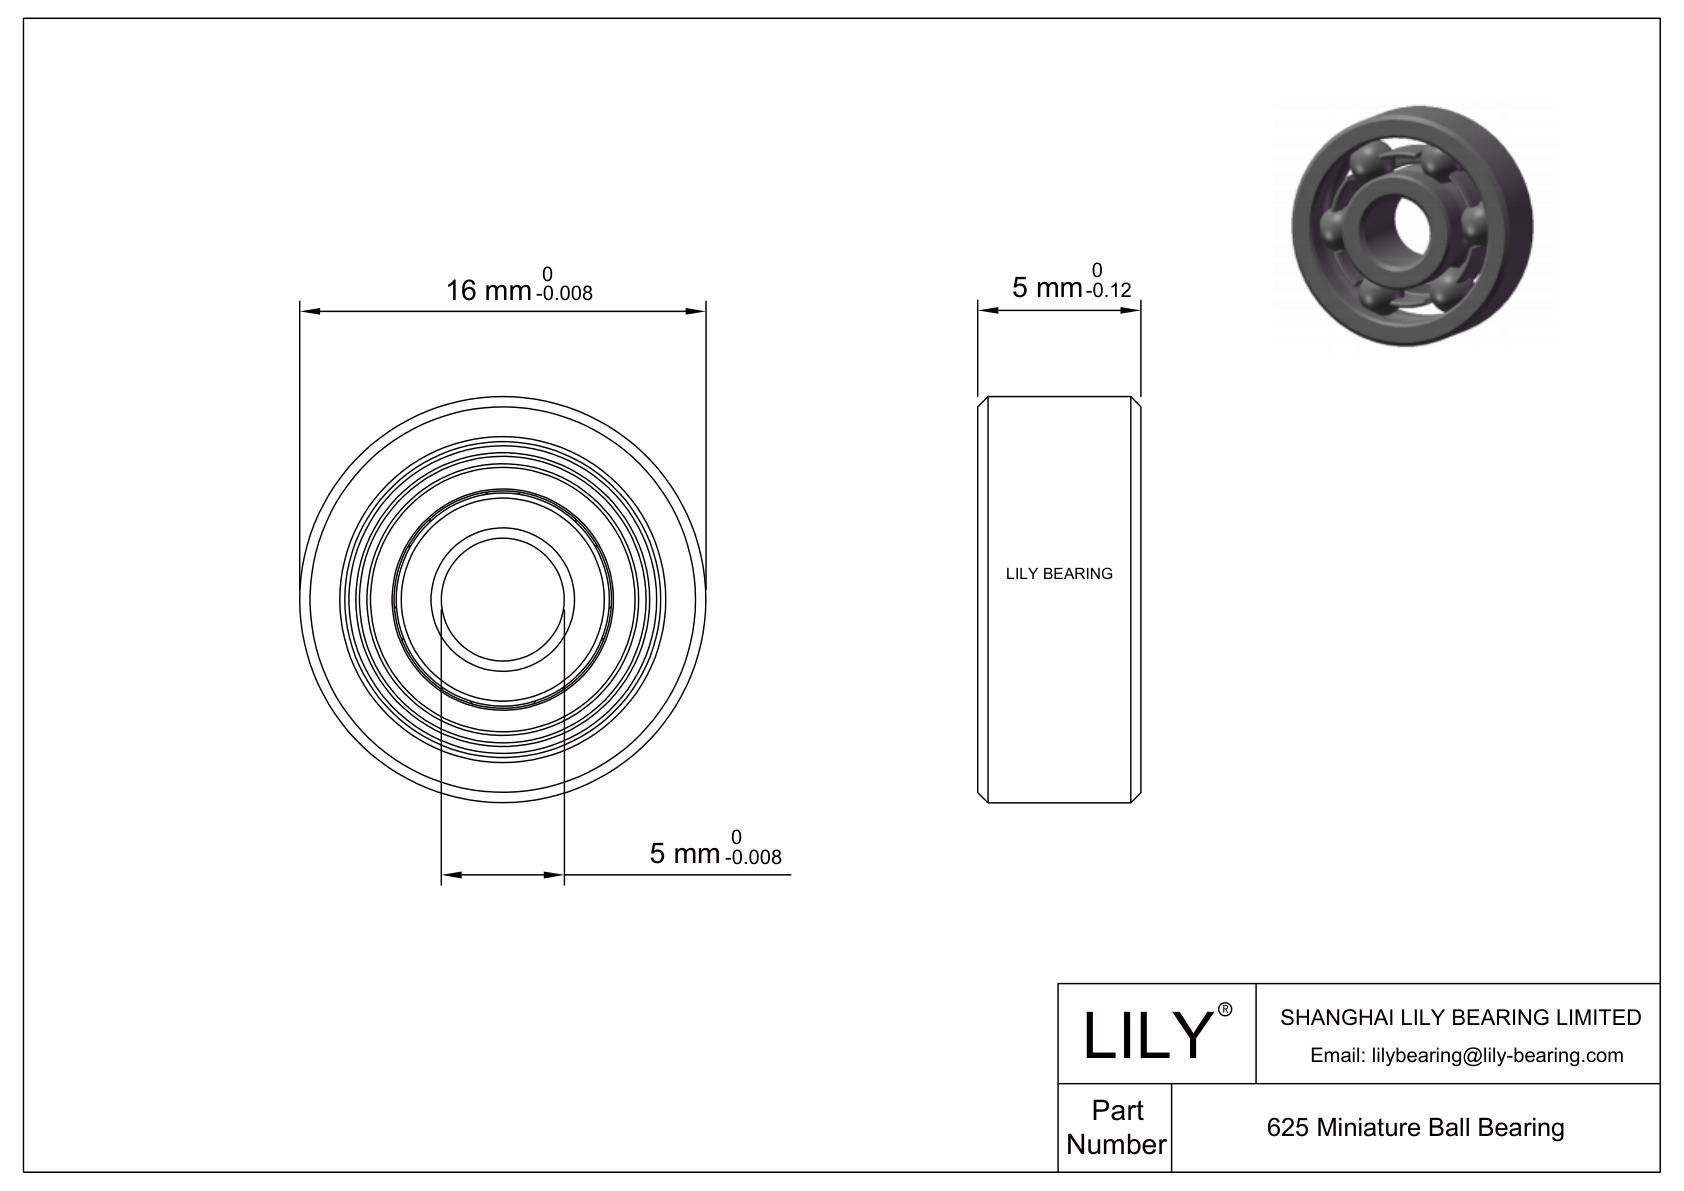 LILY-BS62522-9 POM Coated Bearing cad drawing